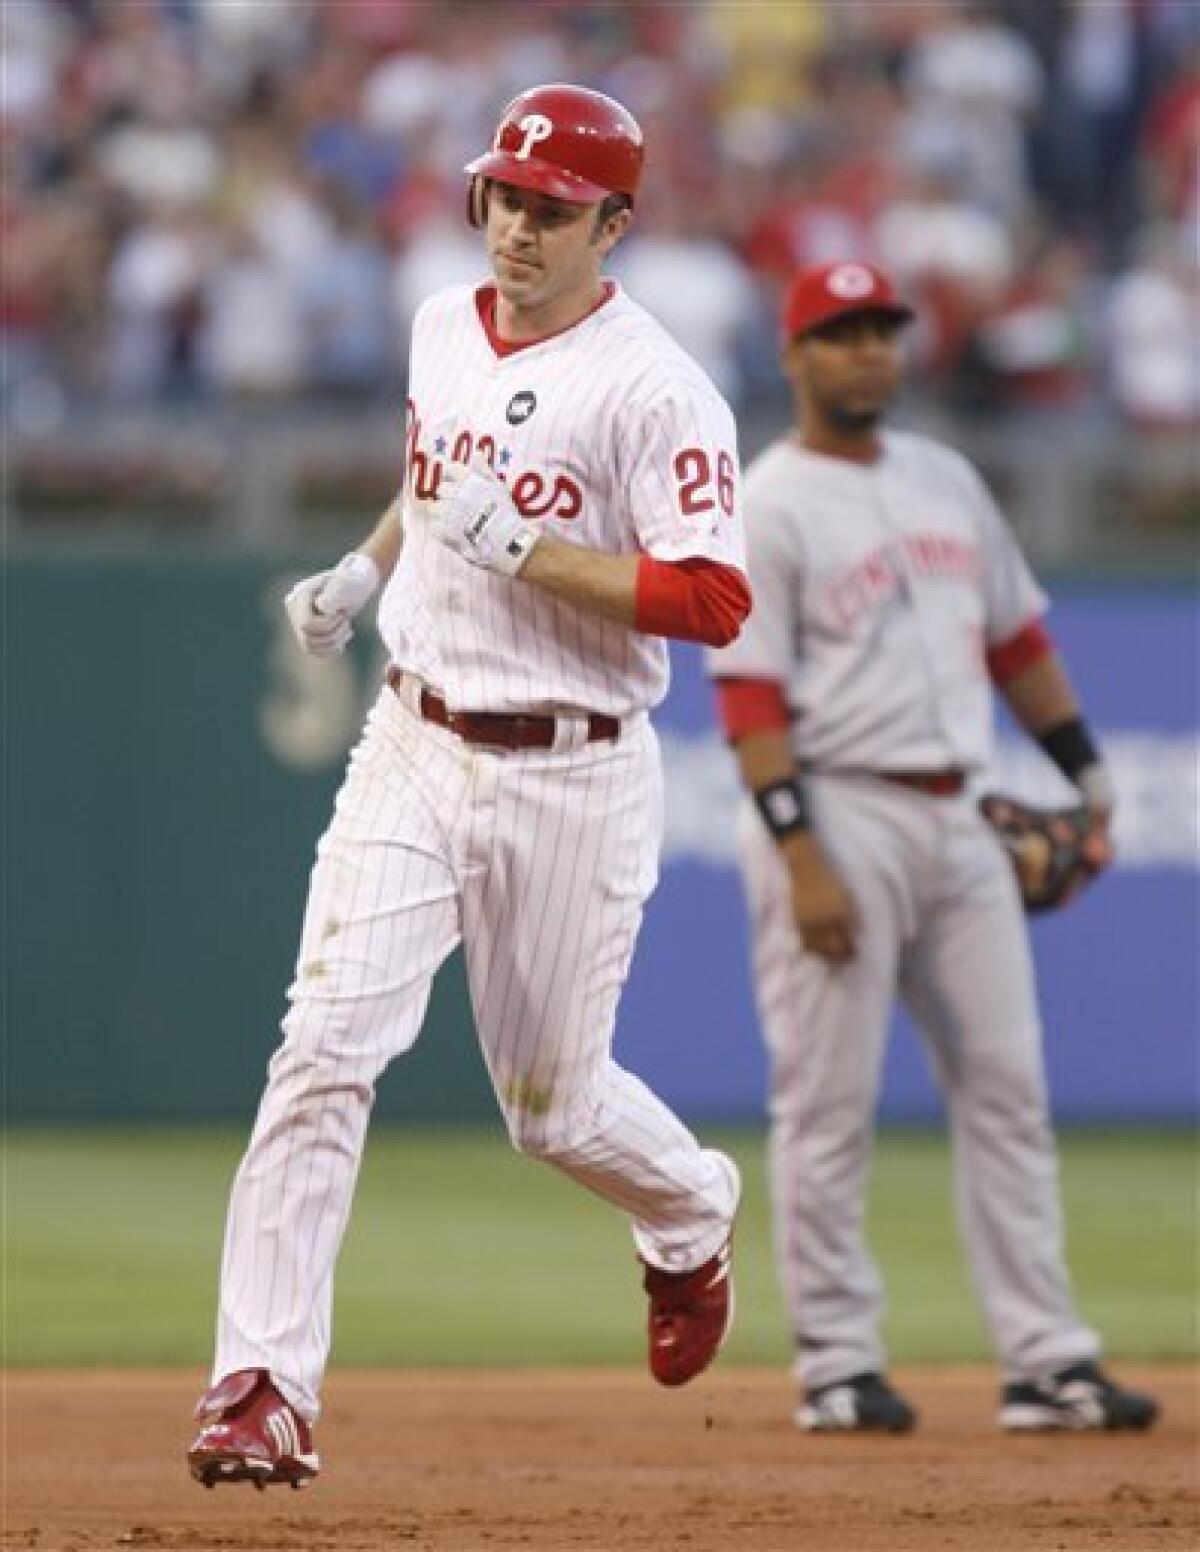 14 years ago, Jimmy Rollins and Chase Utley made history - The